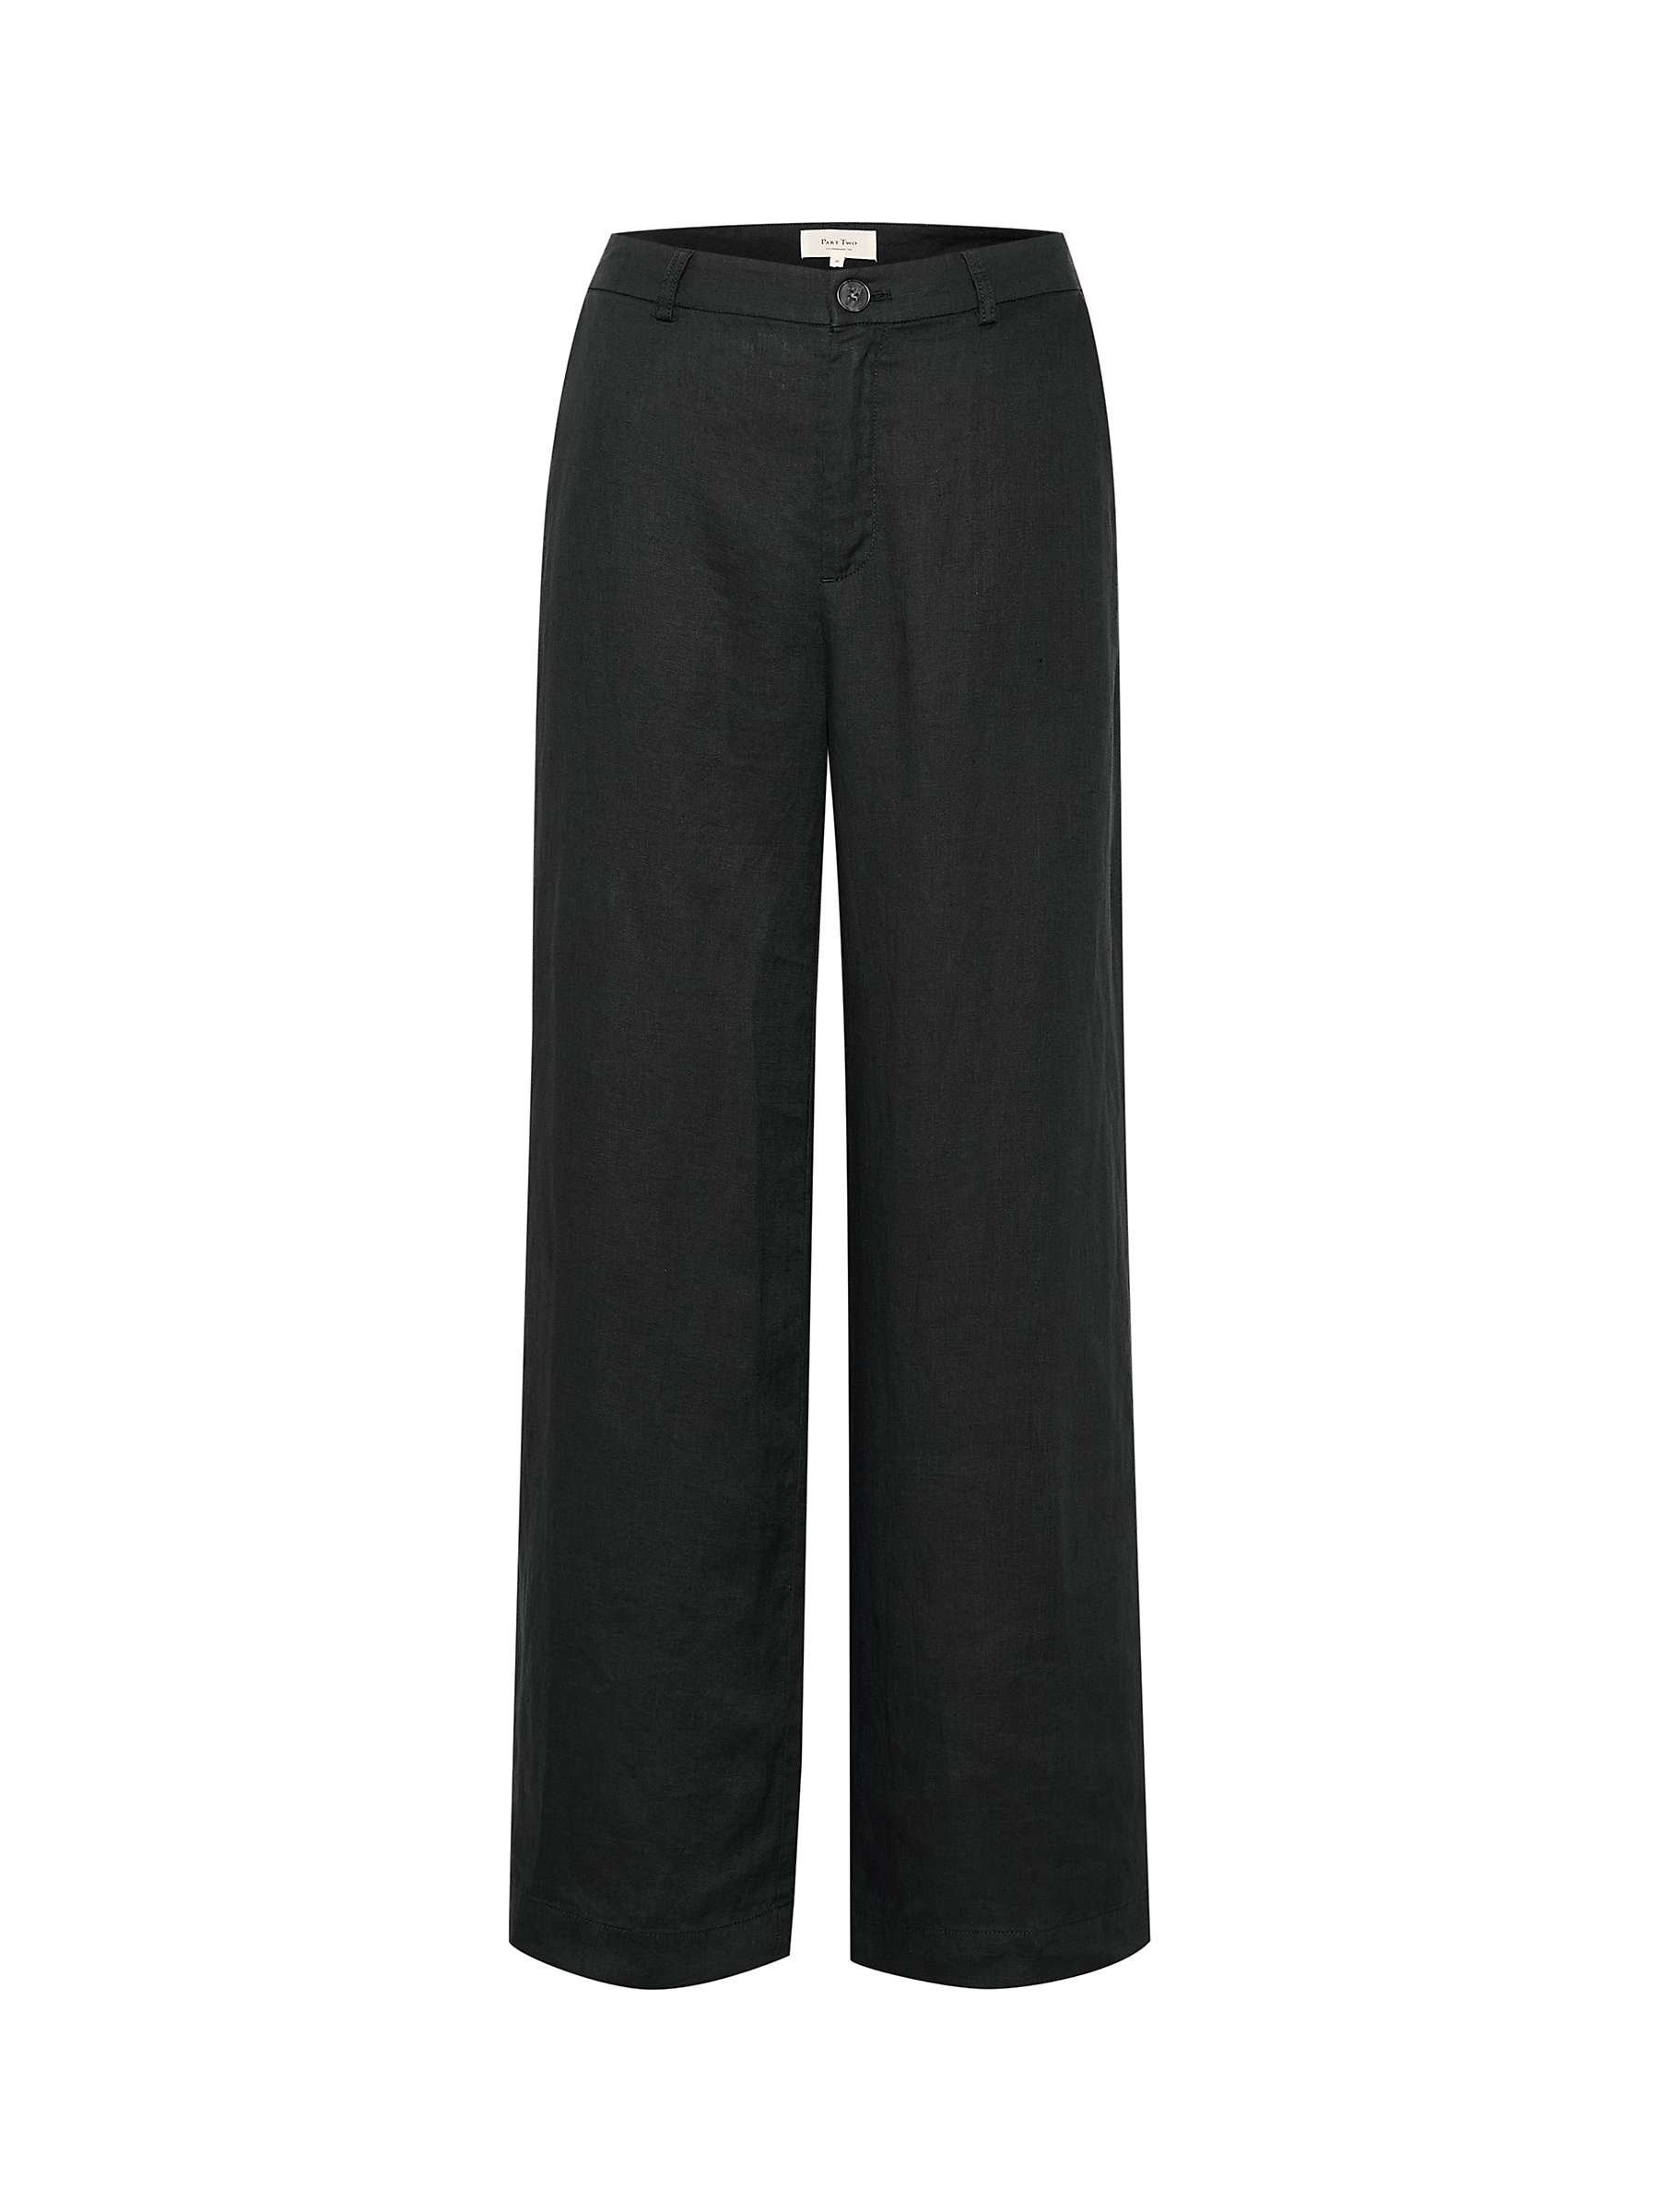 Buy Part Two Ninnes Wide Leg Trousers Online at johnlewis.com